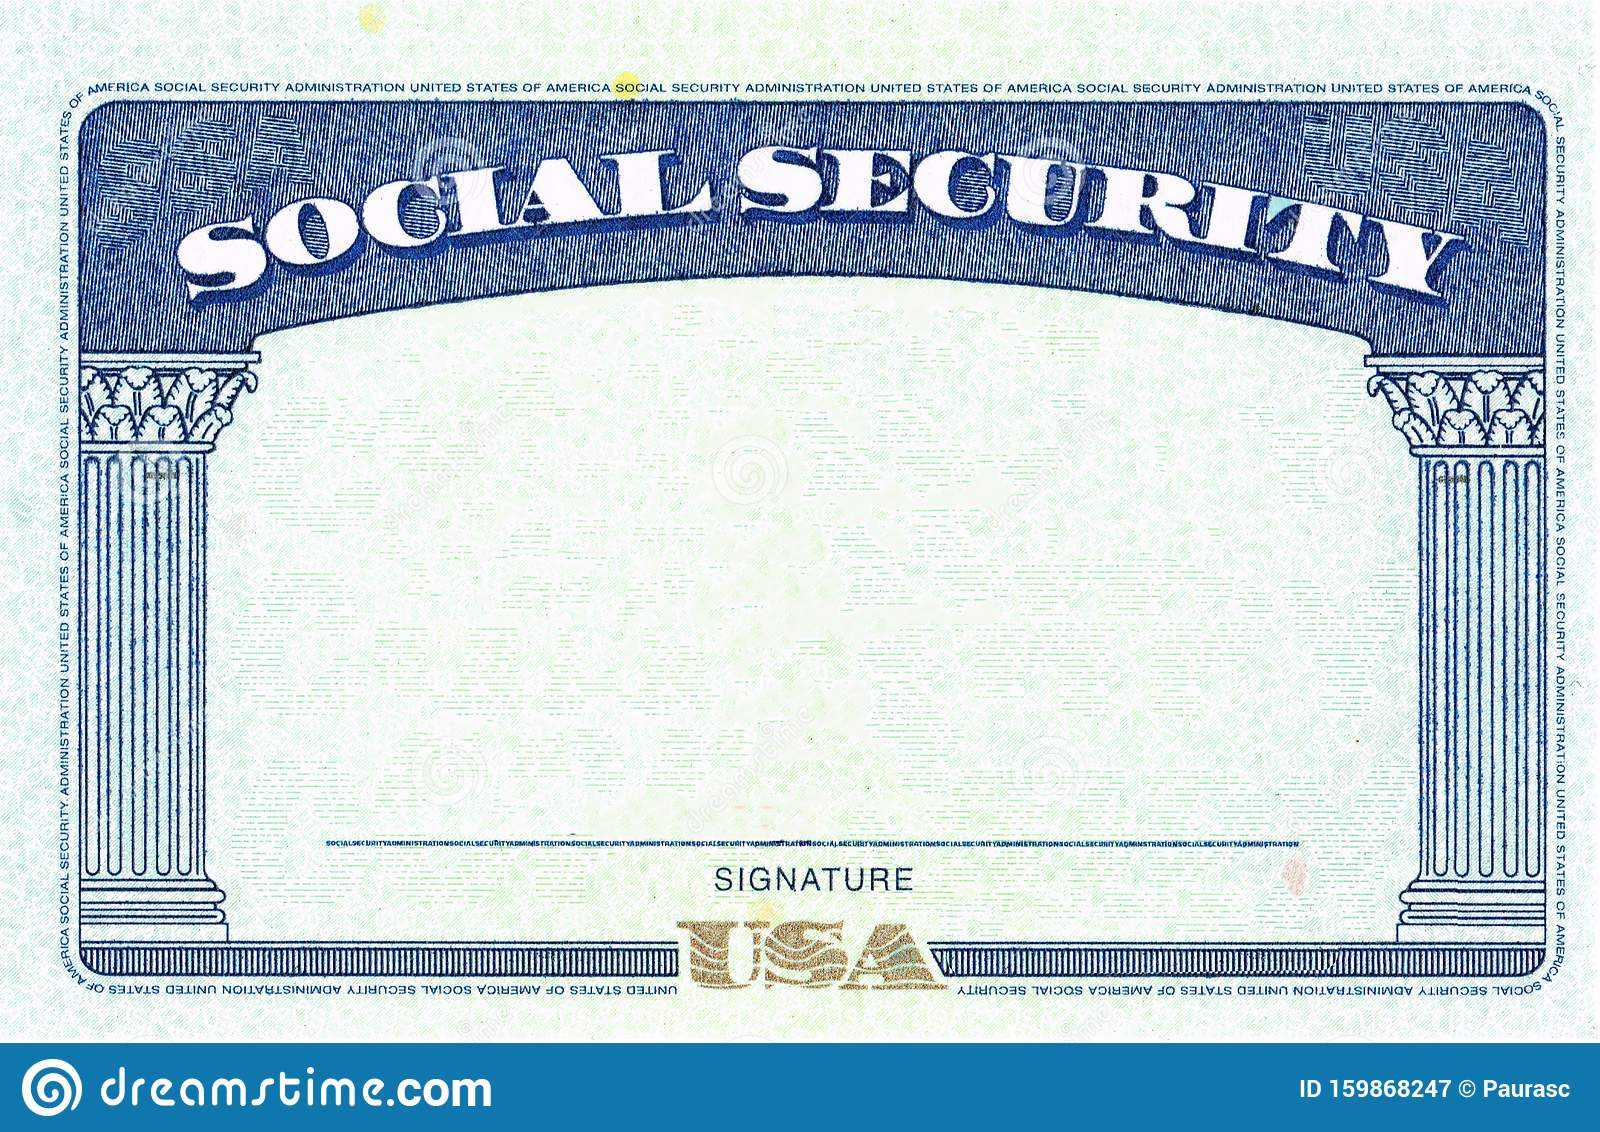 Social Security Card Blank Stock Image. Image Of Emigration With Regard To Blank Social Security Card Template Download